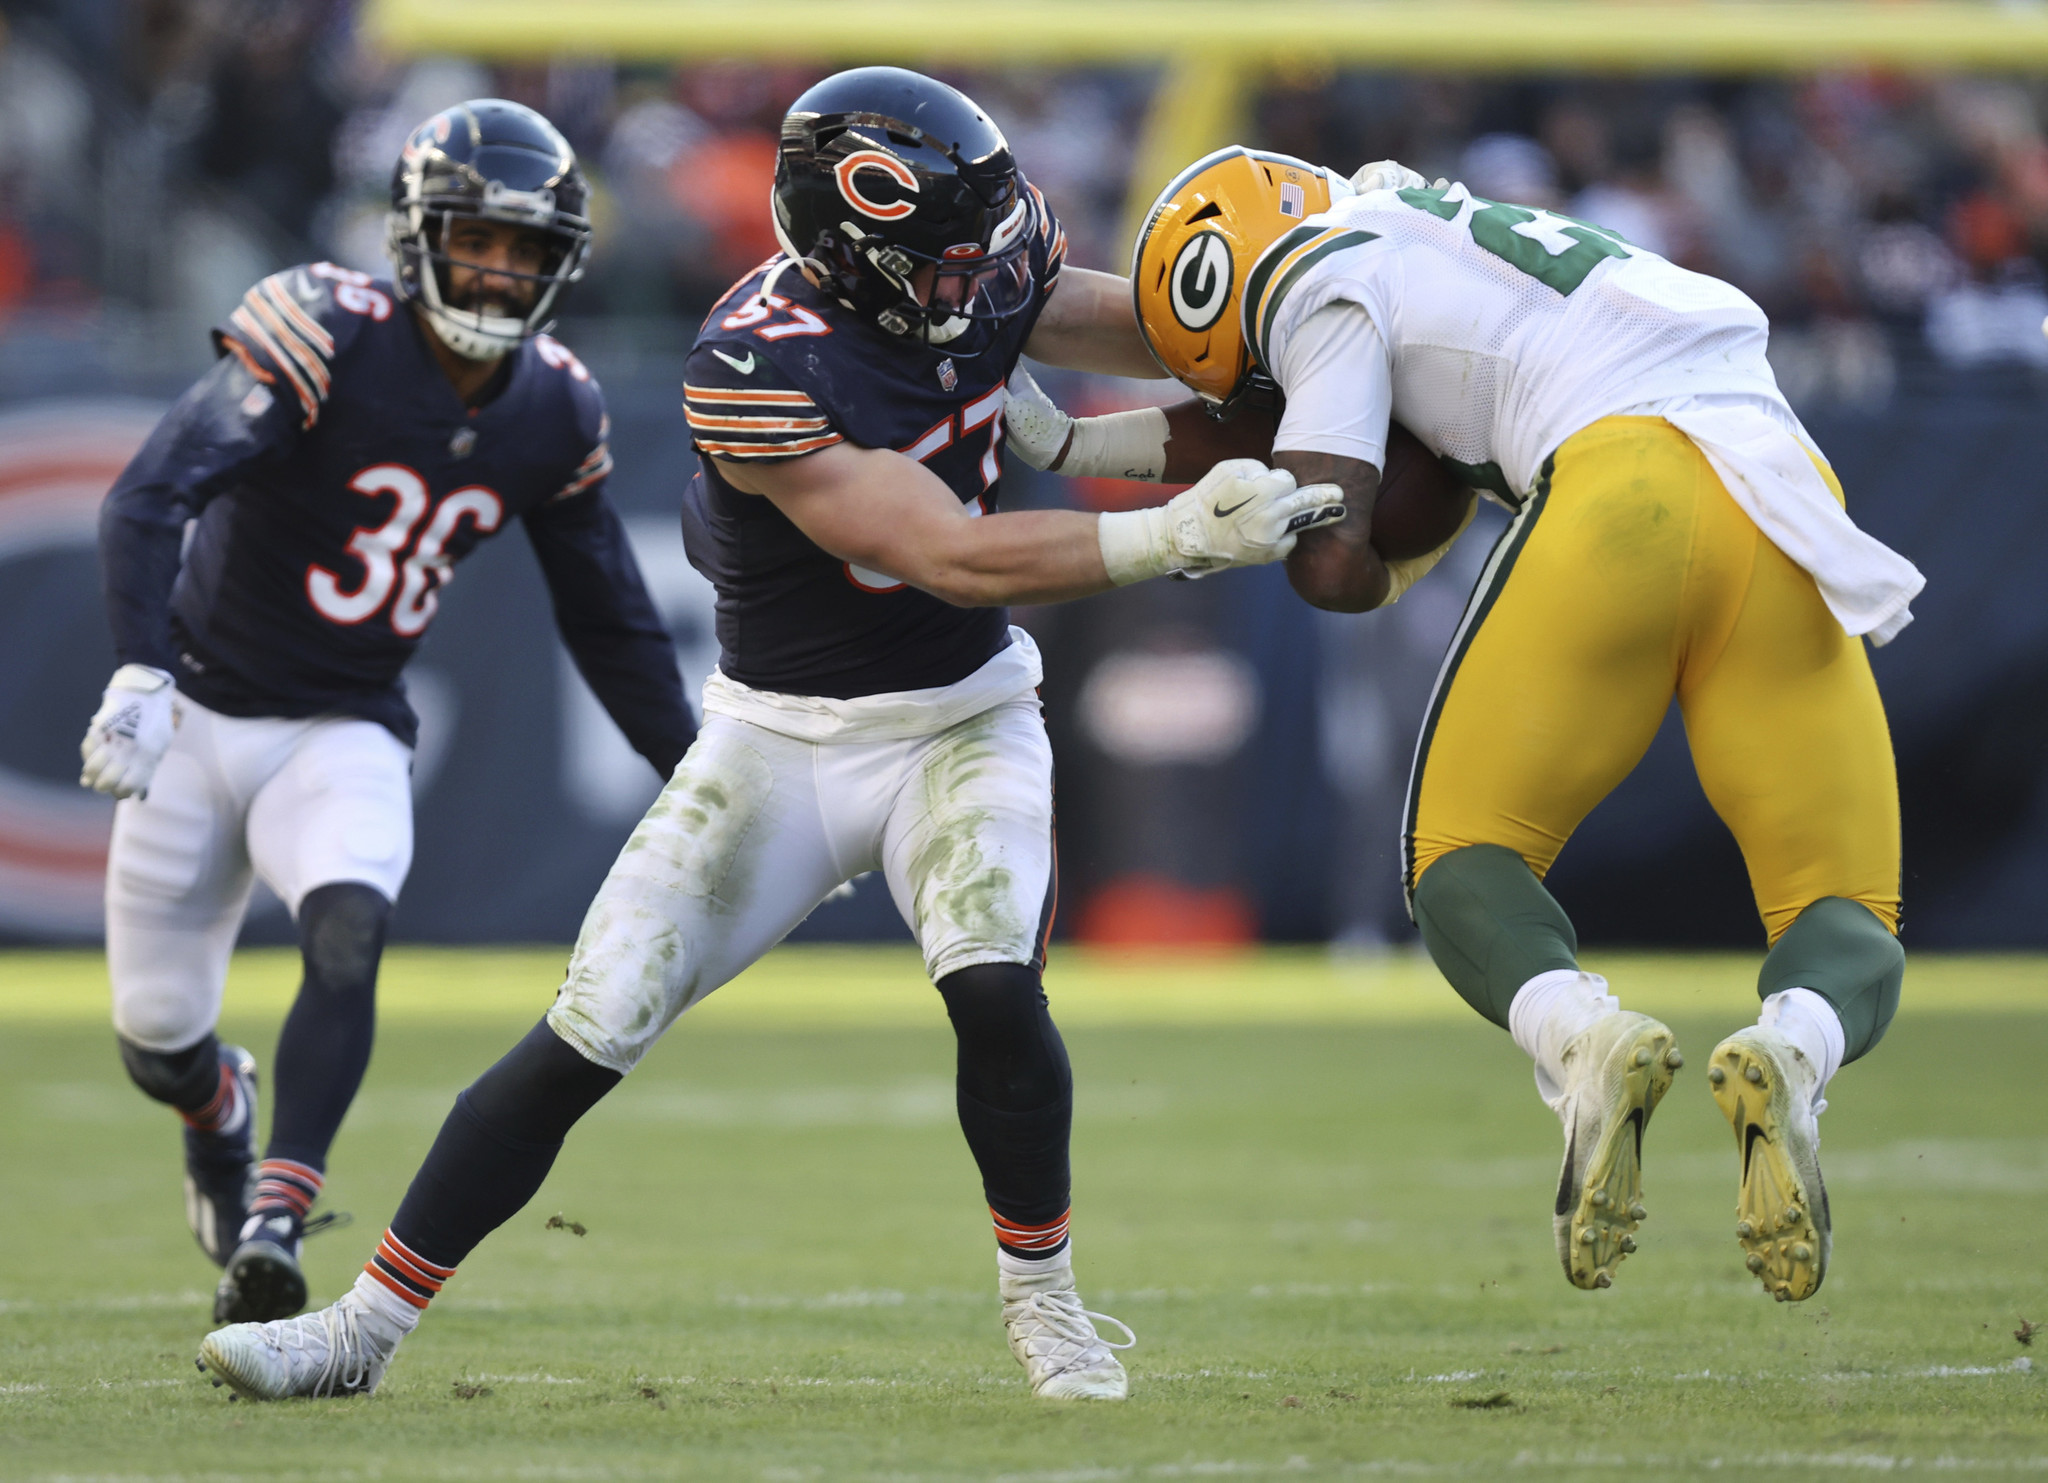 Bears add linebacker depth with Jack Sanborn done for the season